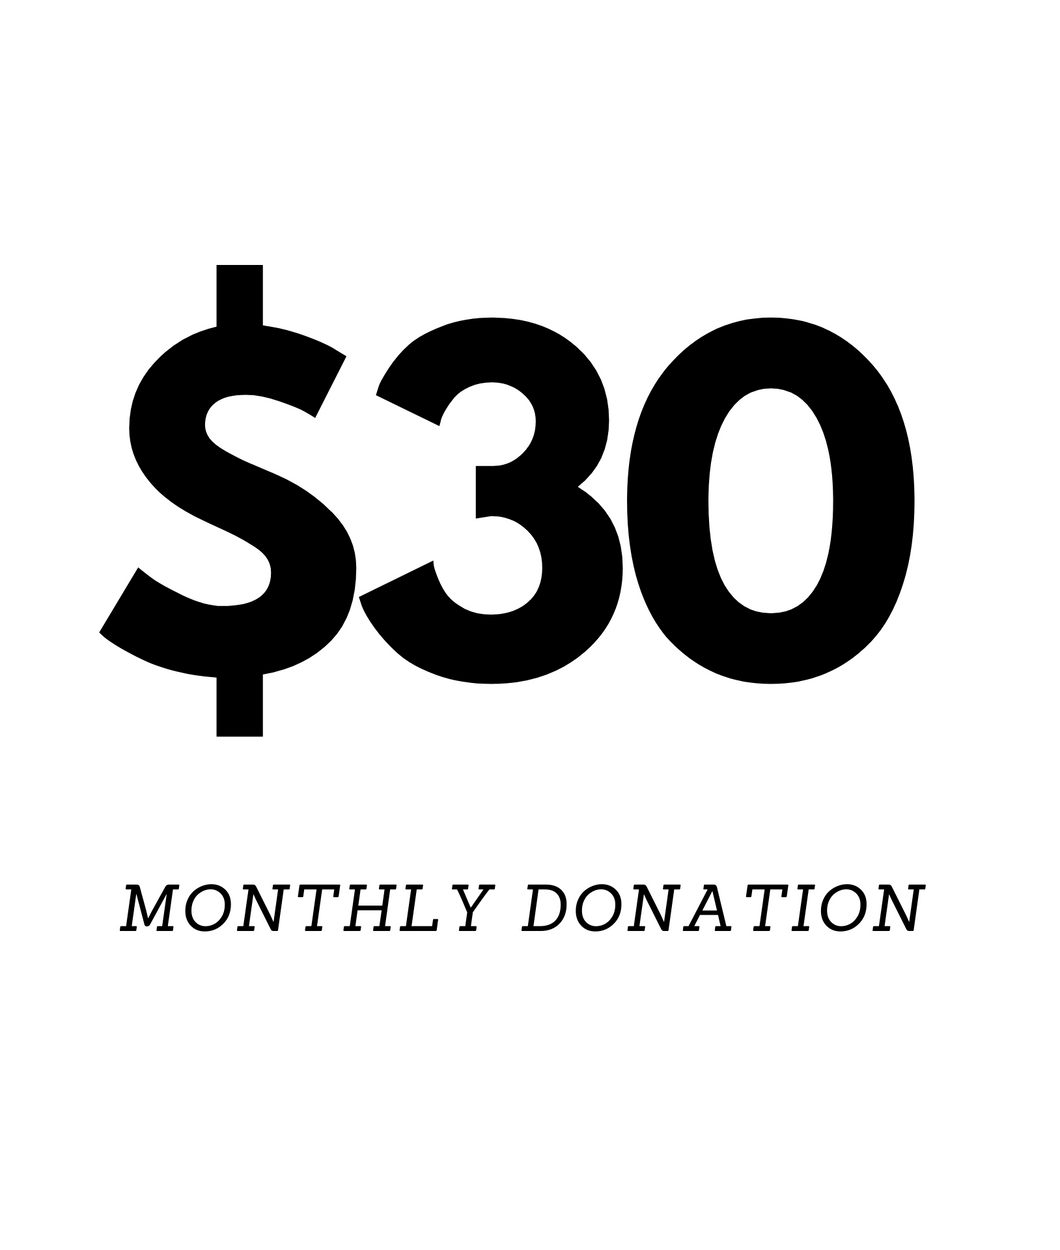 $30 Monthly Donation